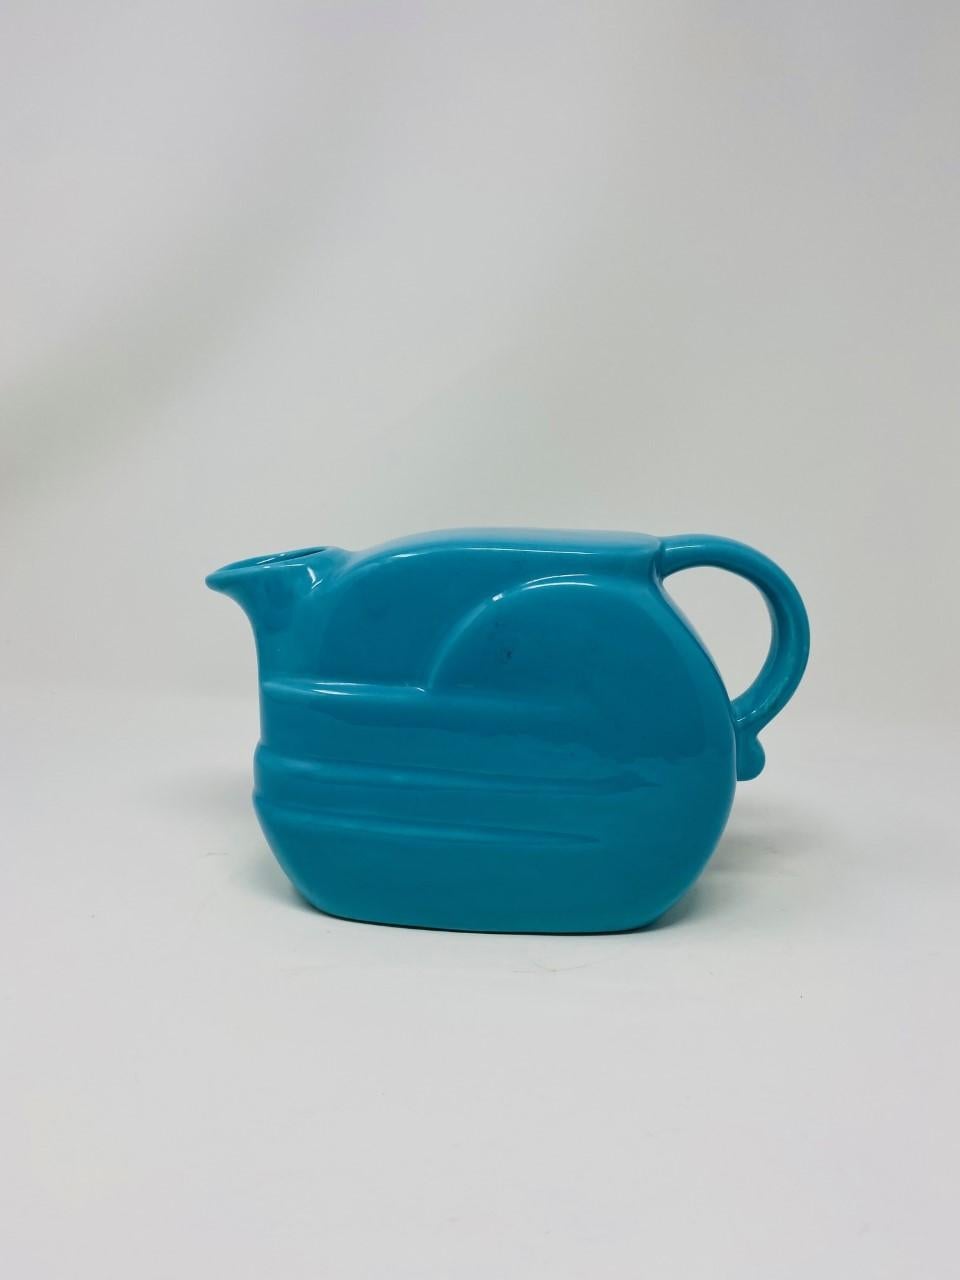 Fired Vintage Aqua Blue Pitcher by Joseph Magnin Italy, Mid Century, 1960 For Sale